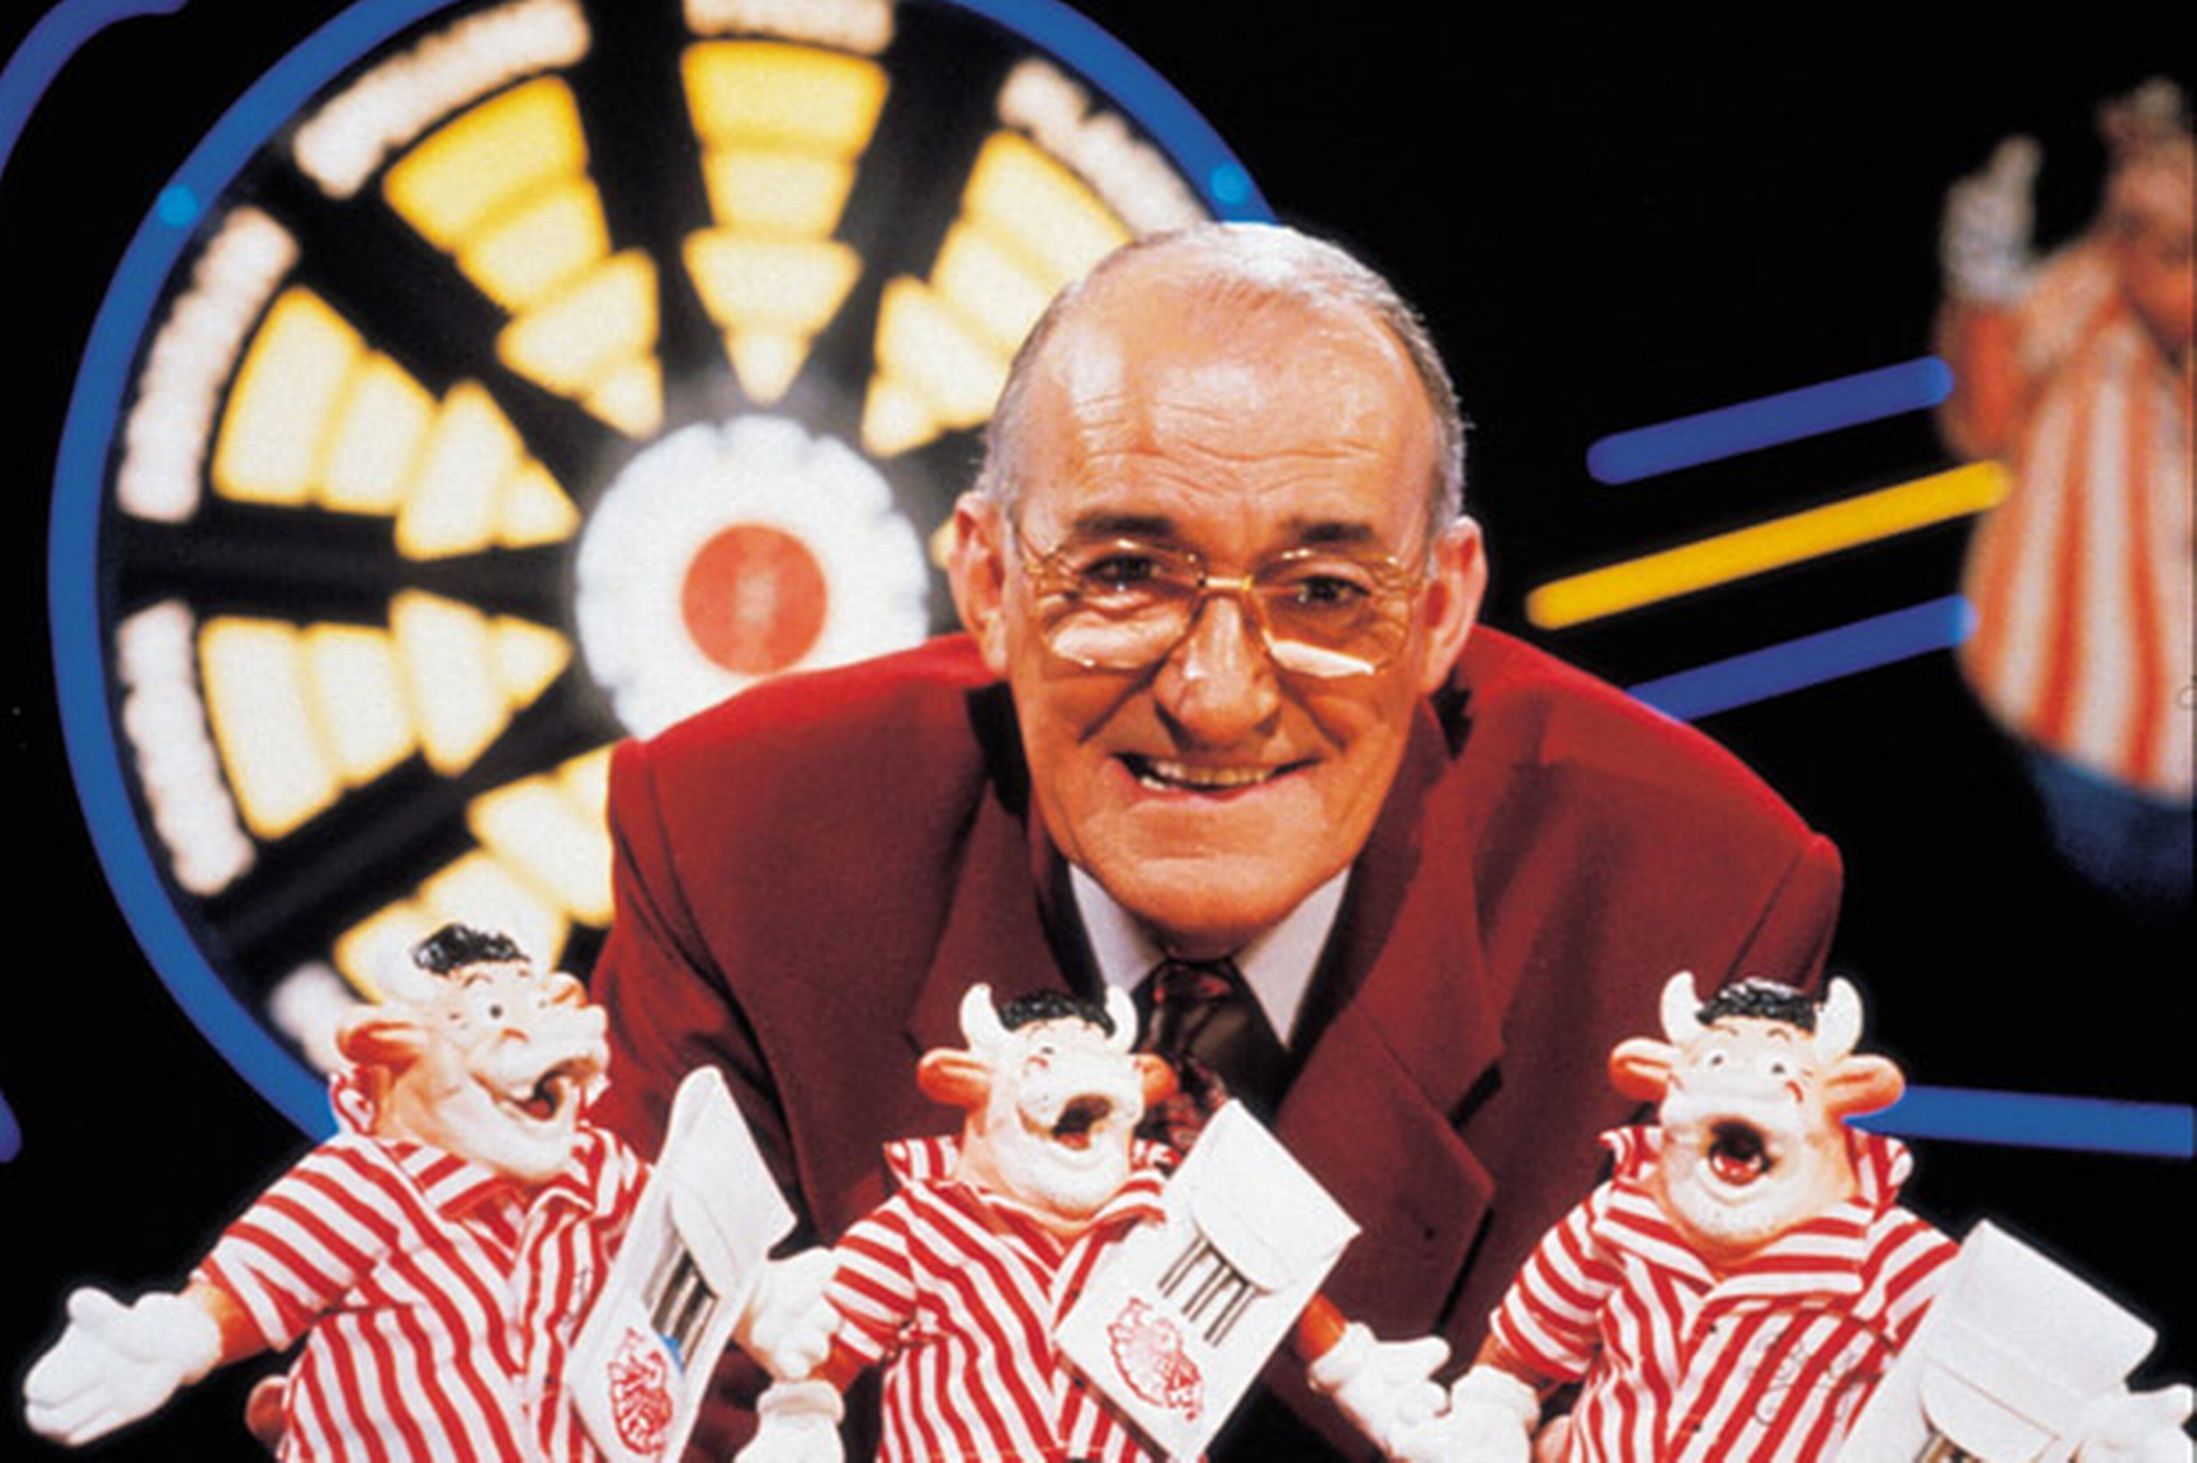 Jim Bowen presenting Bullseye in the 1980s and 1990s.